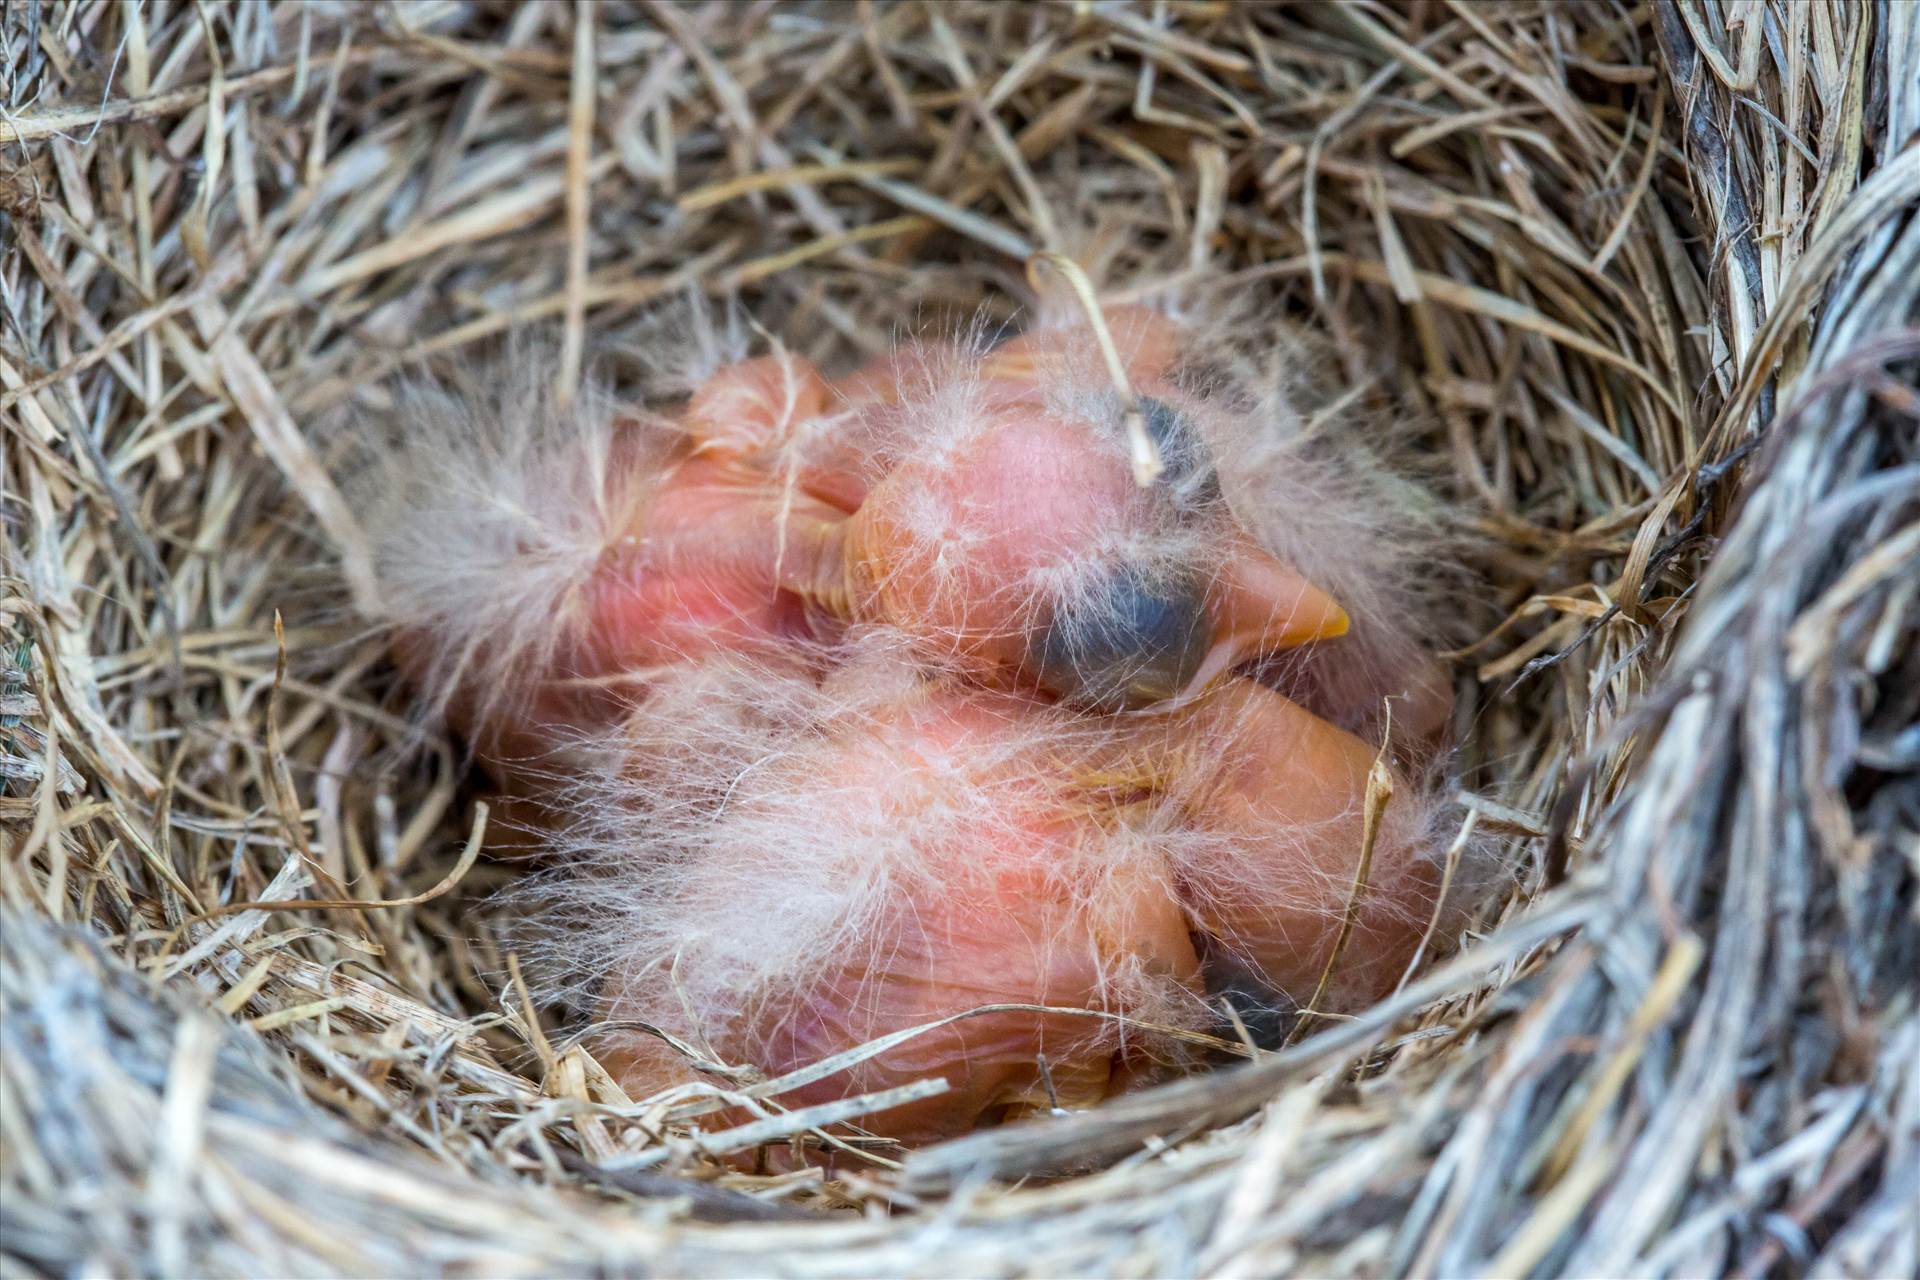 Babies in the Nest  by Scott Smith Photos